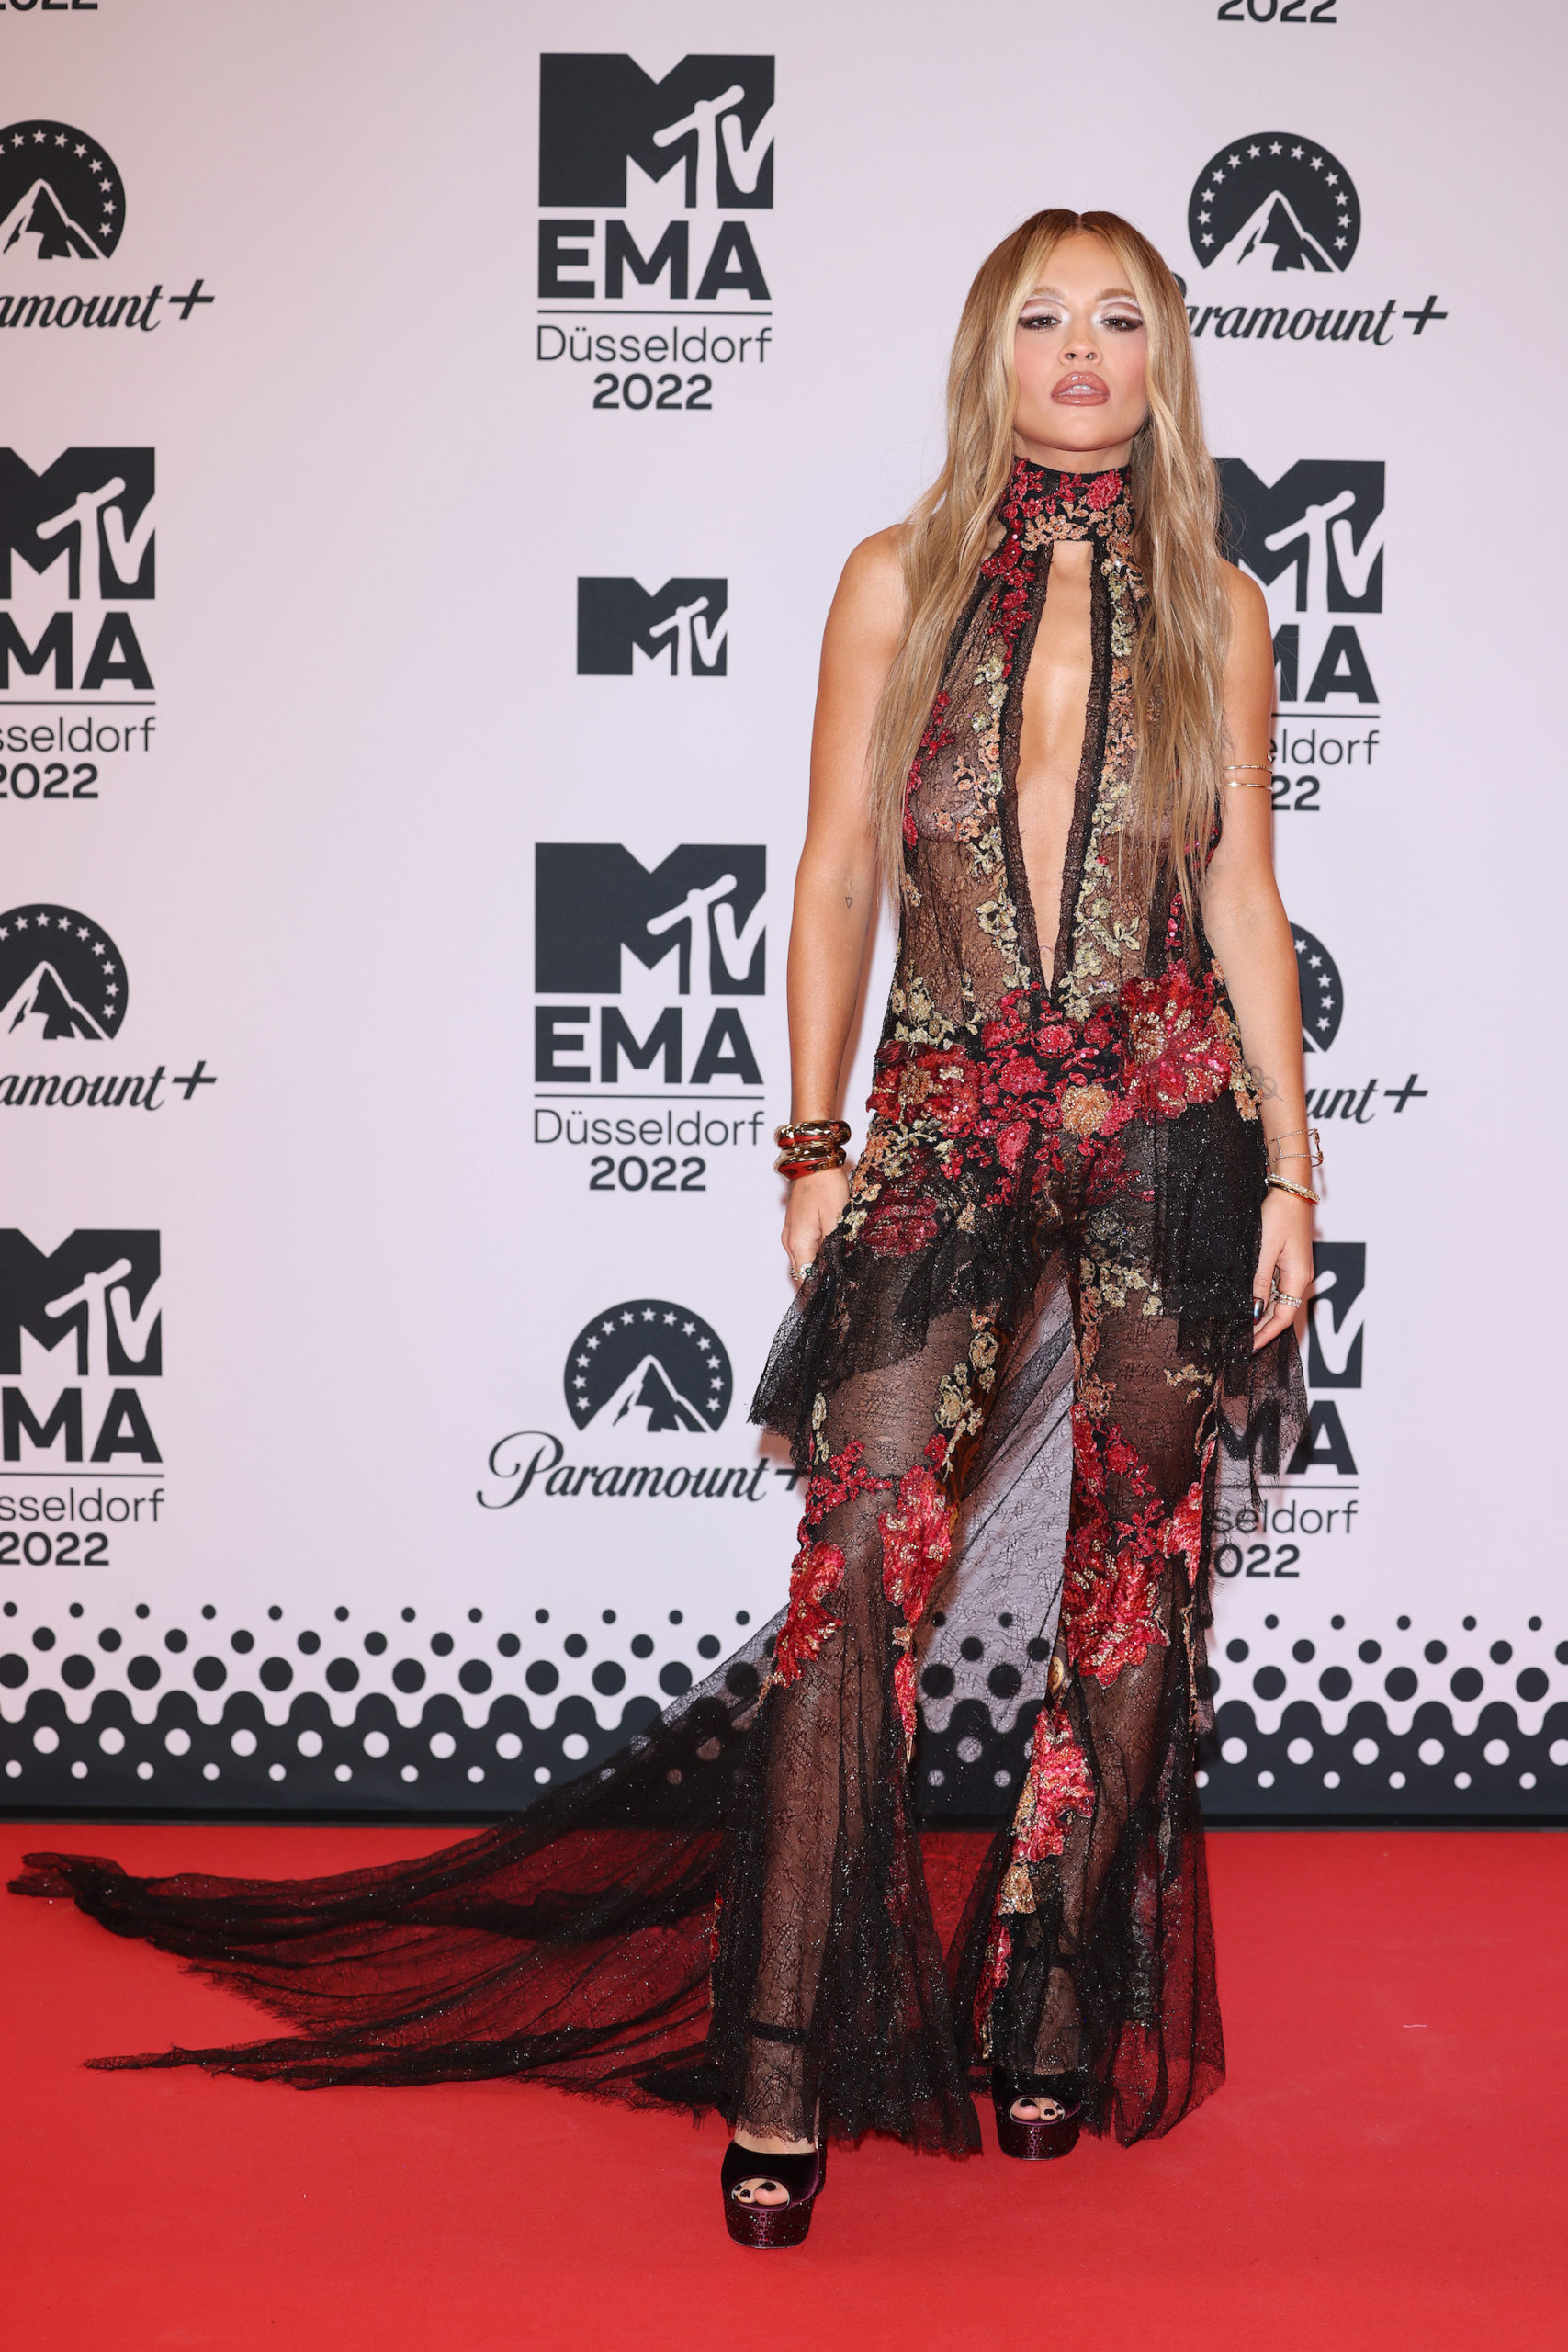  DUESSELDORF, GERMANY - NOVEMBER 13: Rita Ora attends the red carpet during the MTV Europe Music Awards 2022 held at PSD Bank Dome on November 13, 2022 in Duesseldorf, Germany. (Photo by Daniele Venturelli/WireImage)